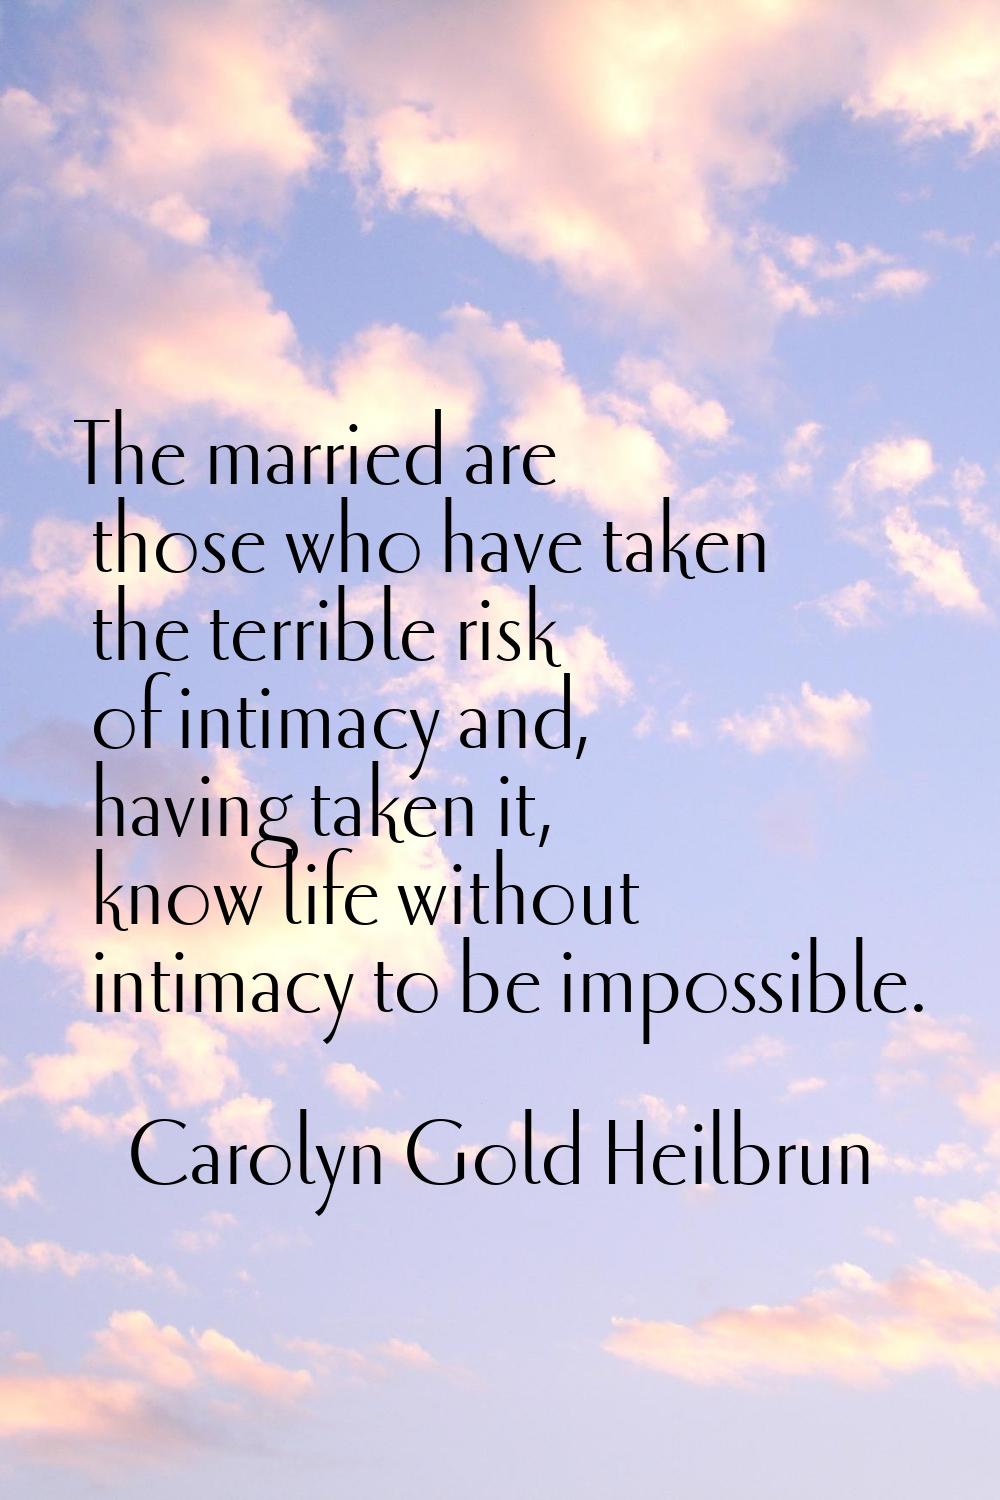 The married are those who have taken the terrible risk of intimacy and, having taken it, know life 